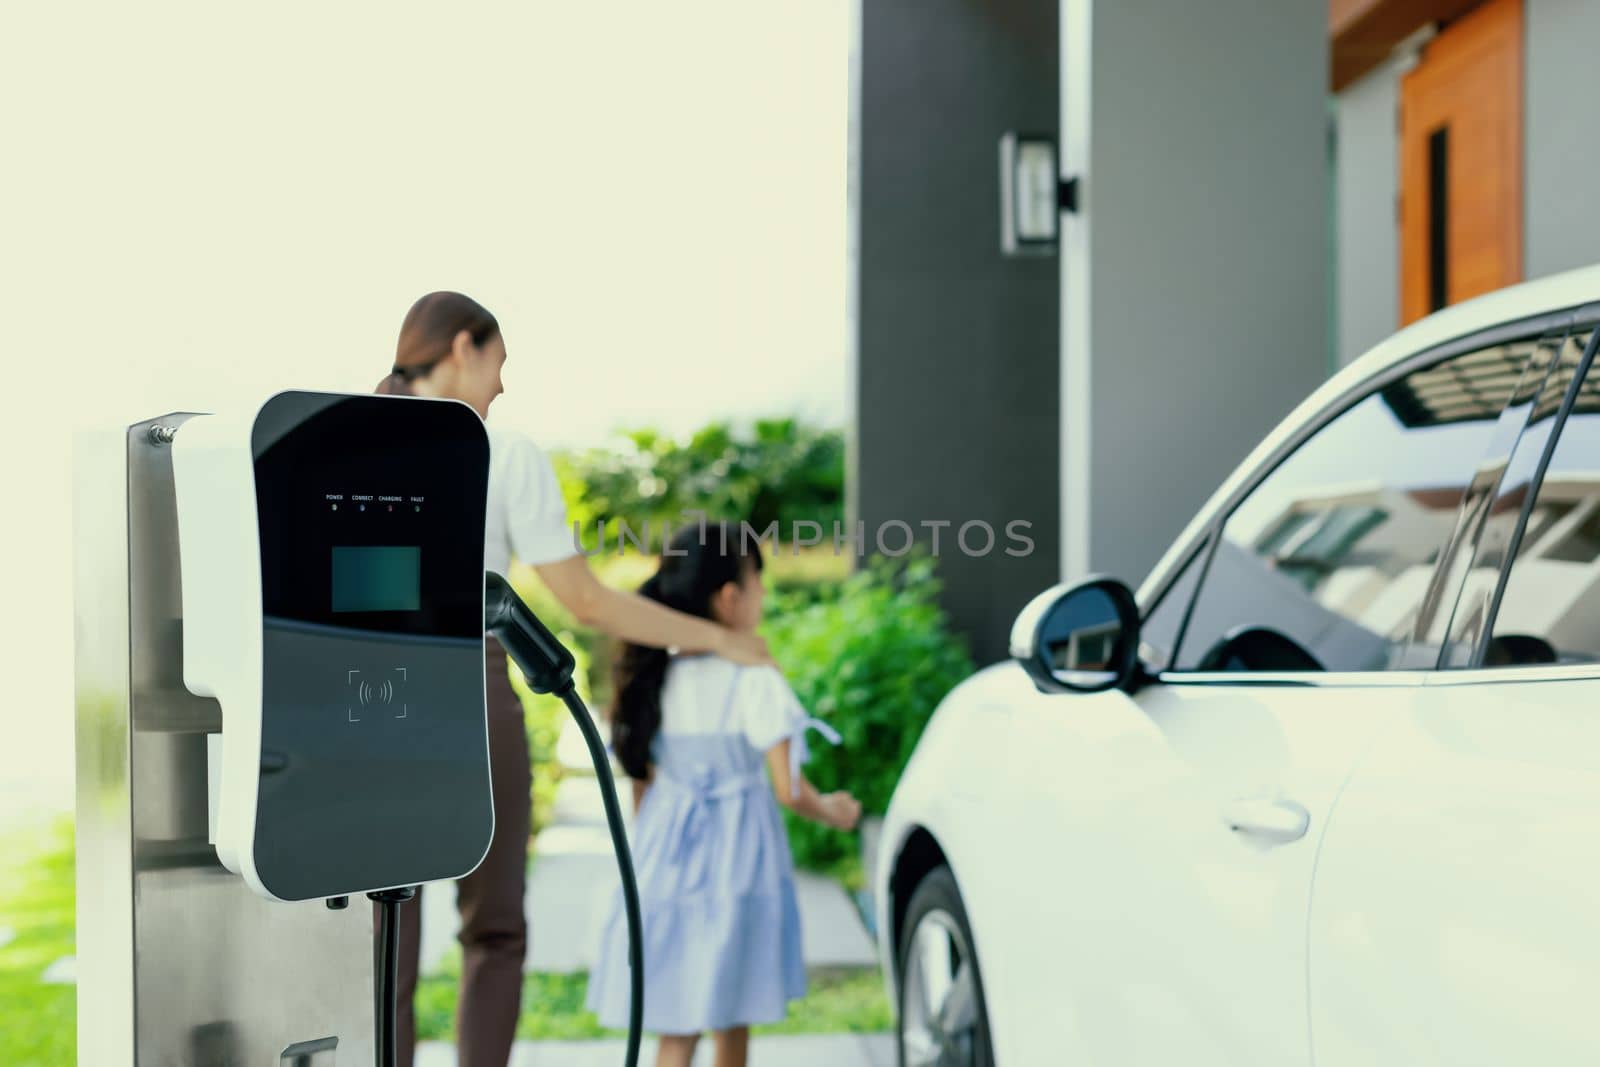 Focus electric charging station power by clean energy for electric vehicle at home with blurred progressive woman and girl walking in background. Home charging station for electric engine car concept